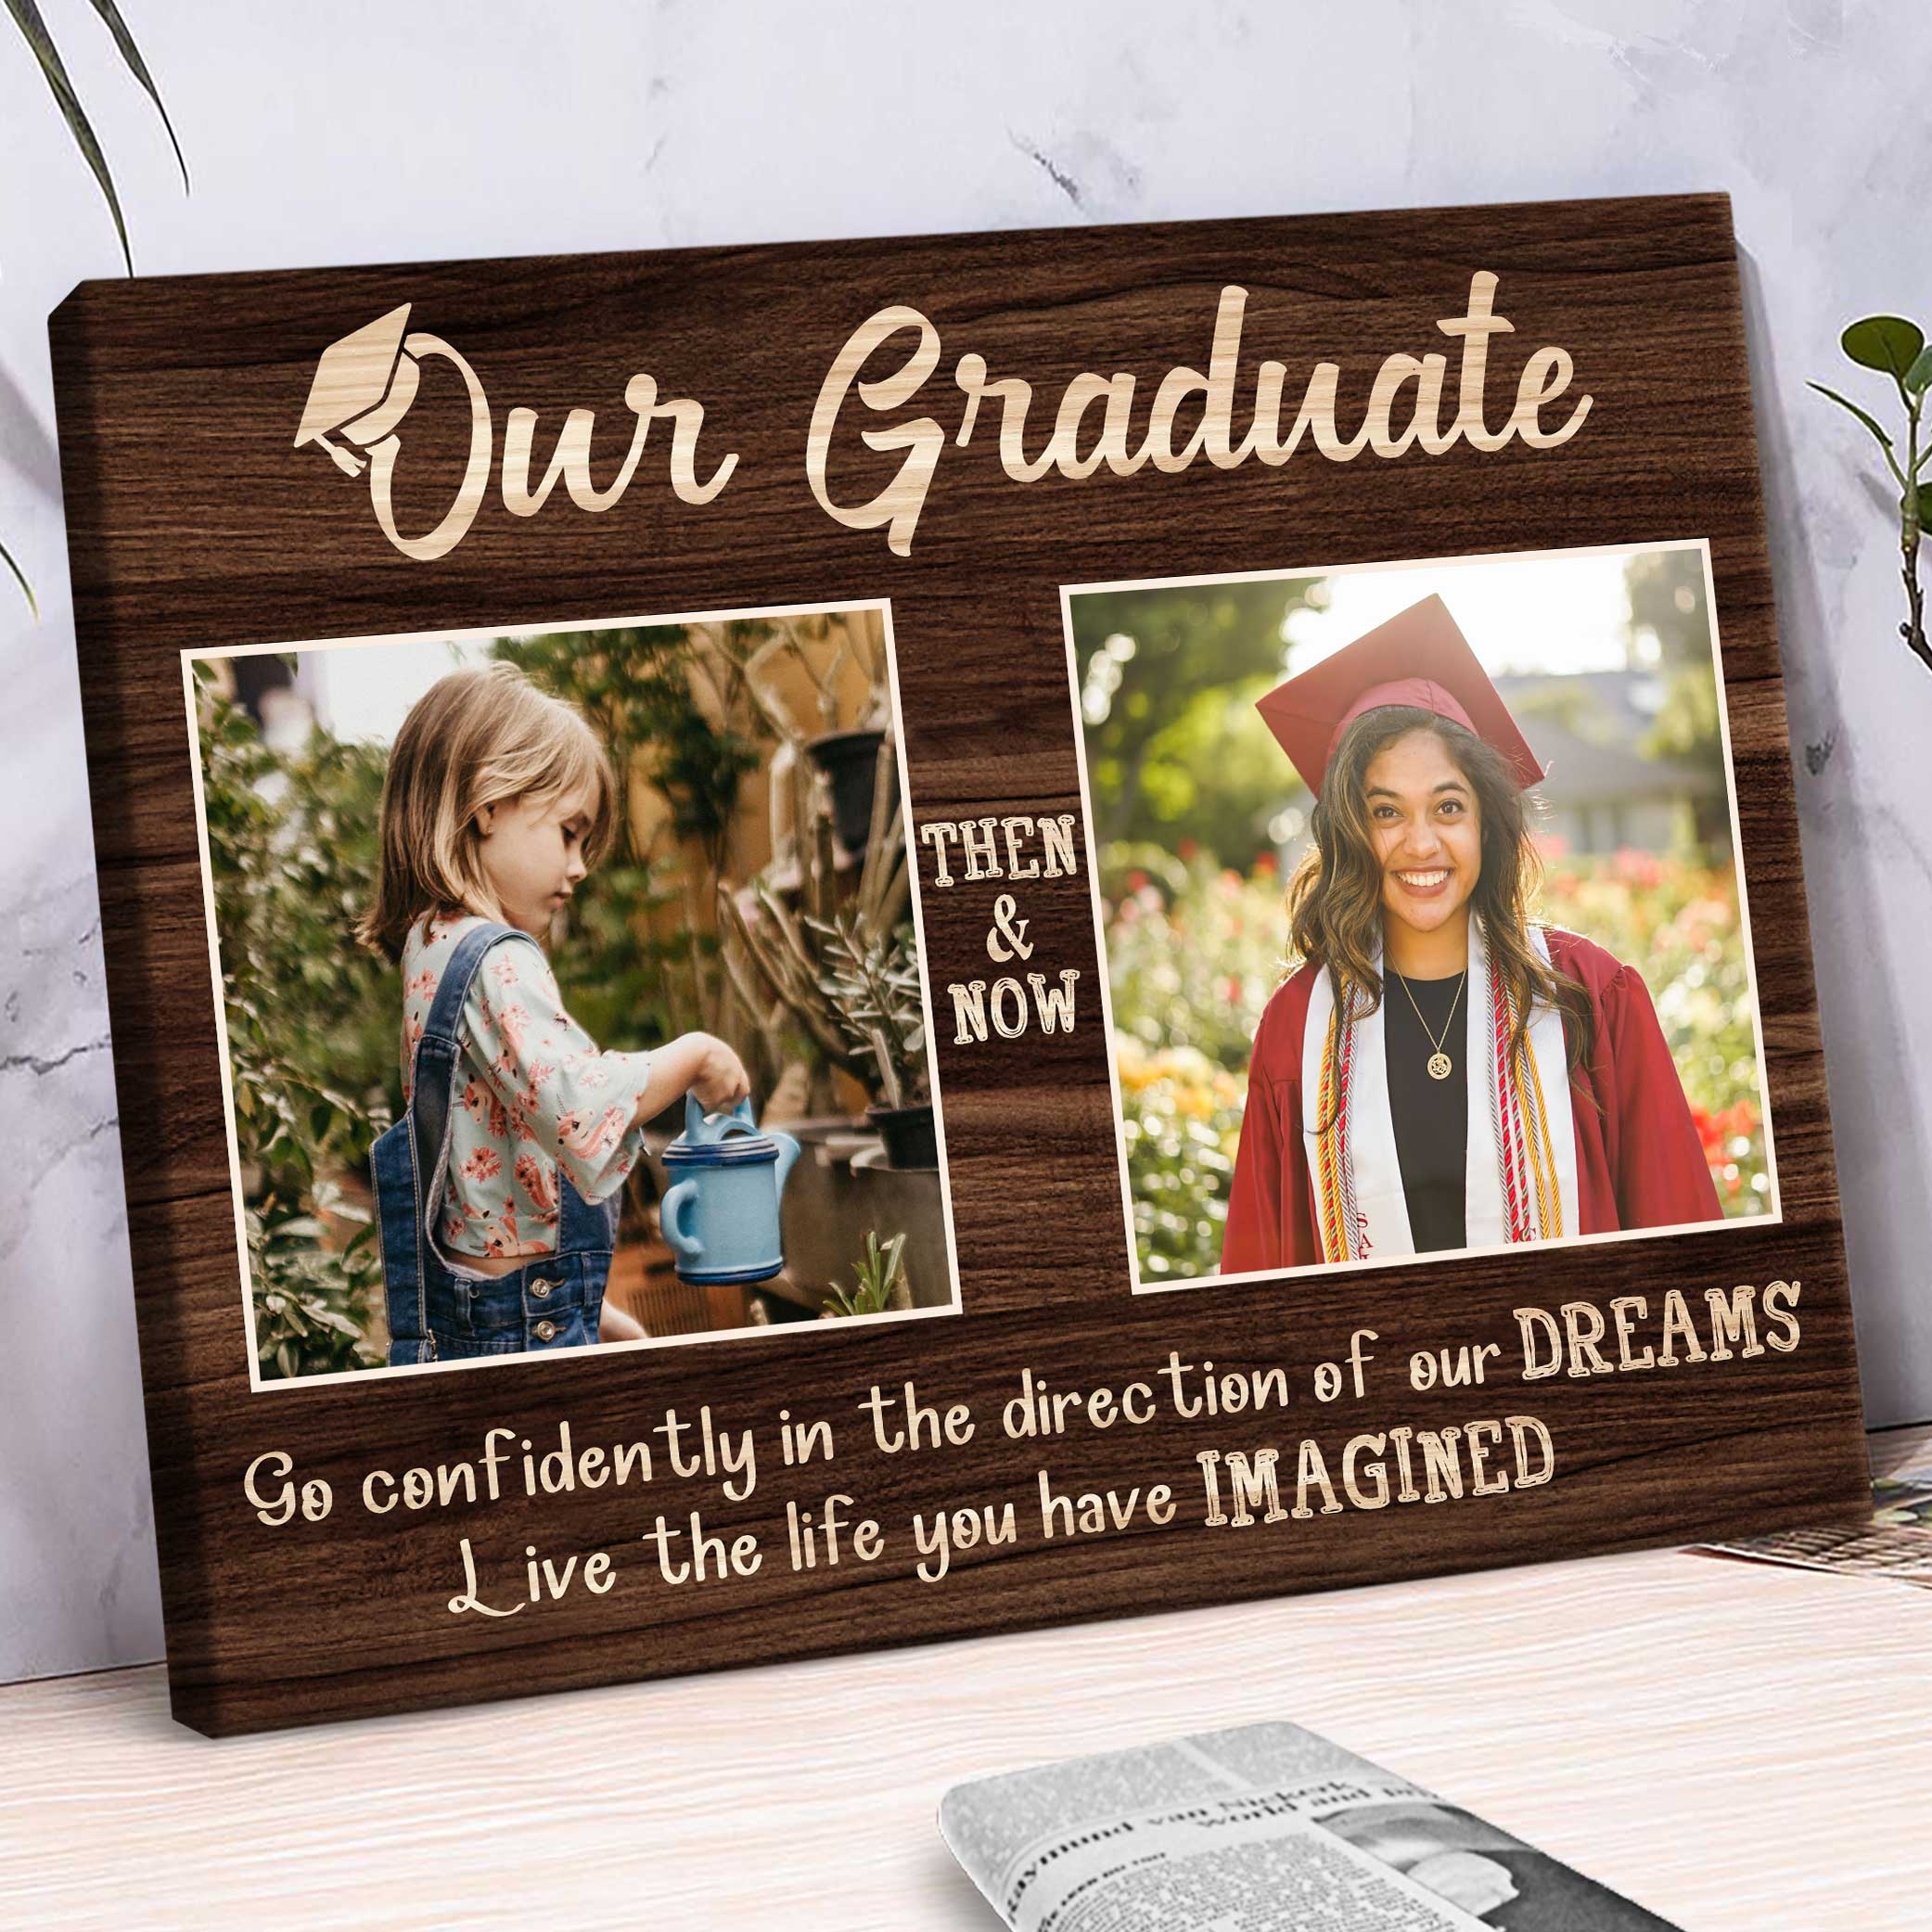 https://benicee.com/wp-content/uploads/2022/09/Custom-Graduation-Gifts-2022-Son-Or-Daughter-Graduation-Gift-From-Mom-And-Dad-Class-Of-2022-Frame.jpg